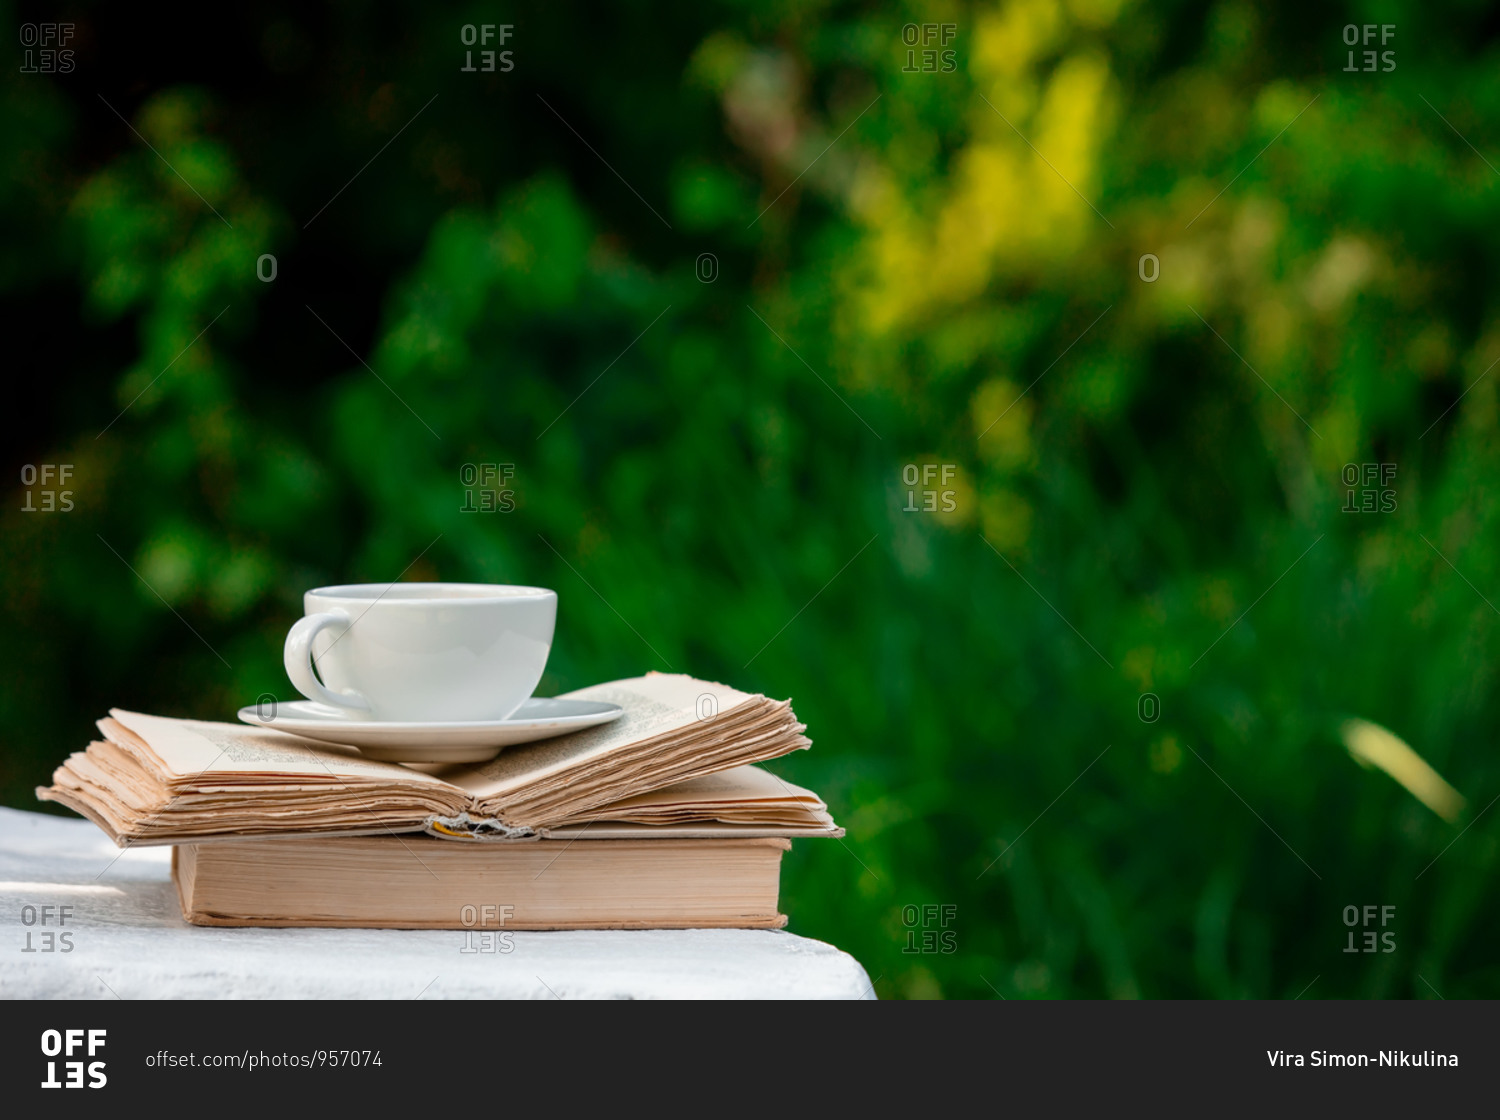 White cup of coffee and books on wooden background in a garden